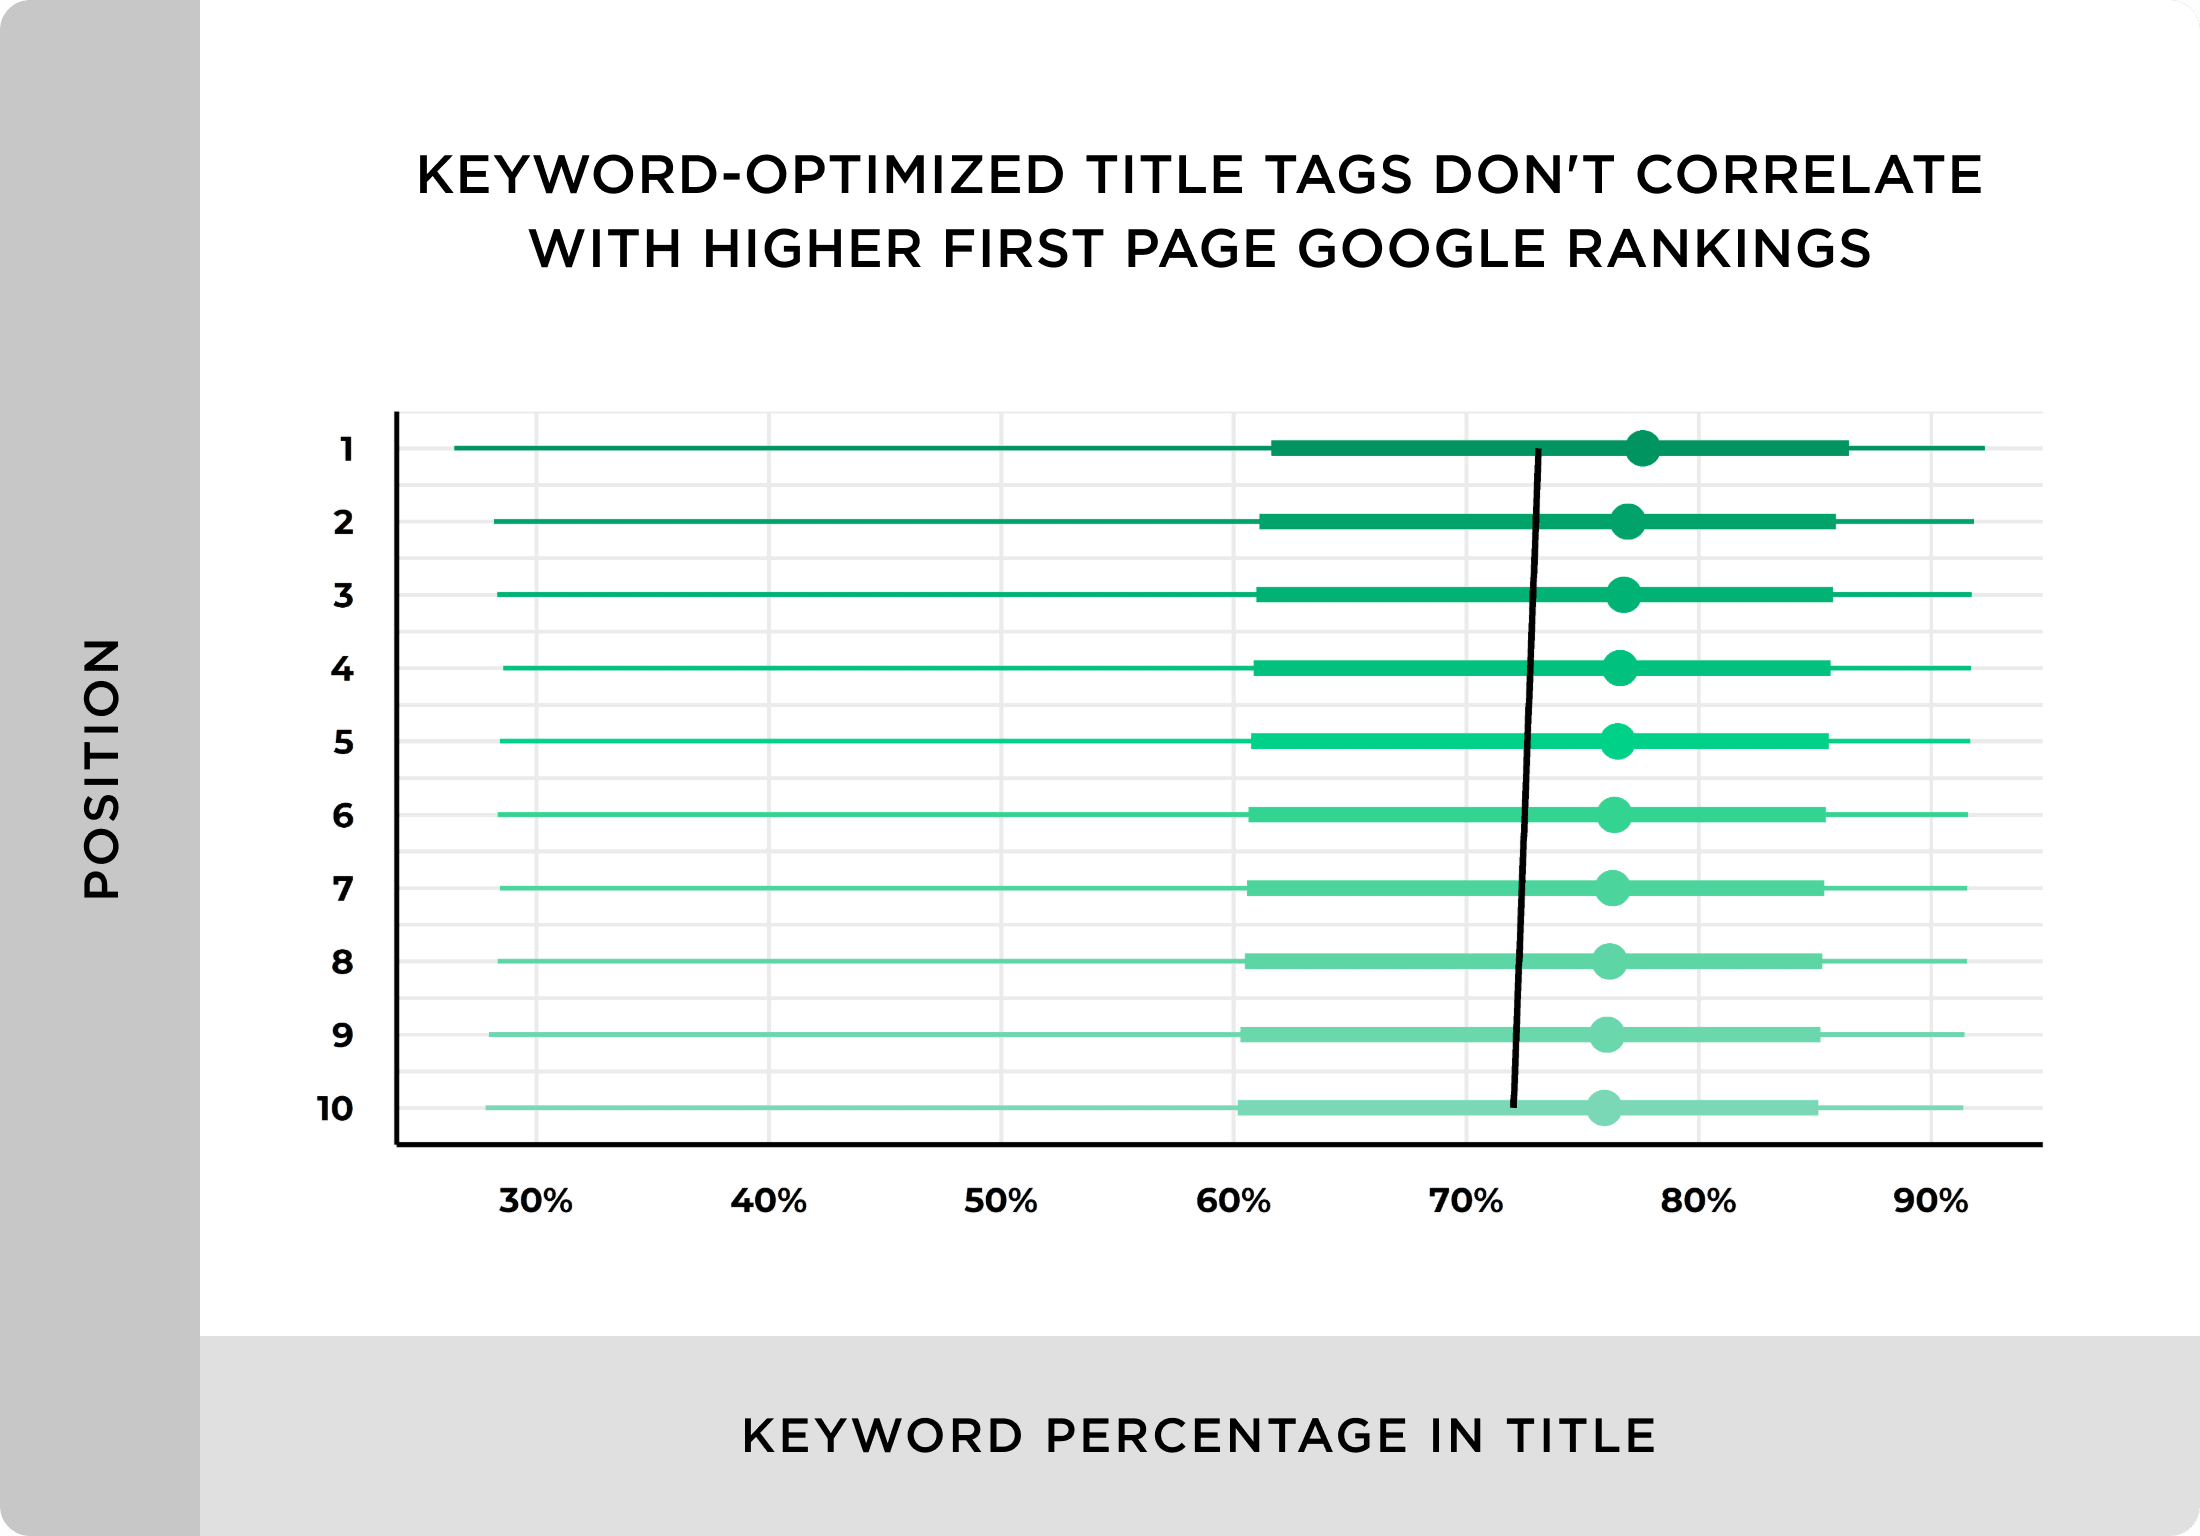 Keyword optimized title tags don't correlate with higher first page Google rankings